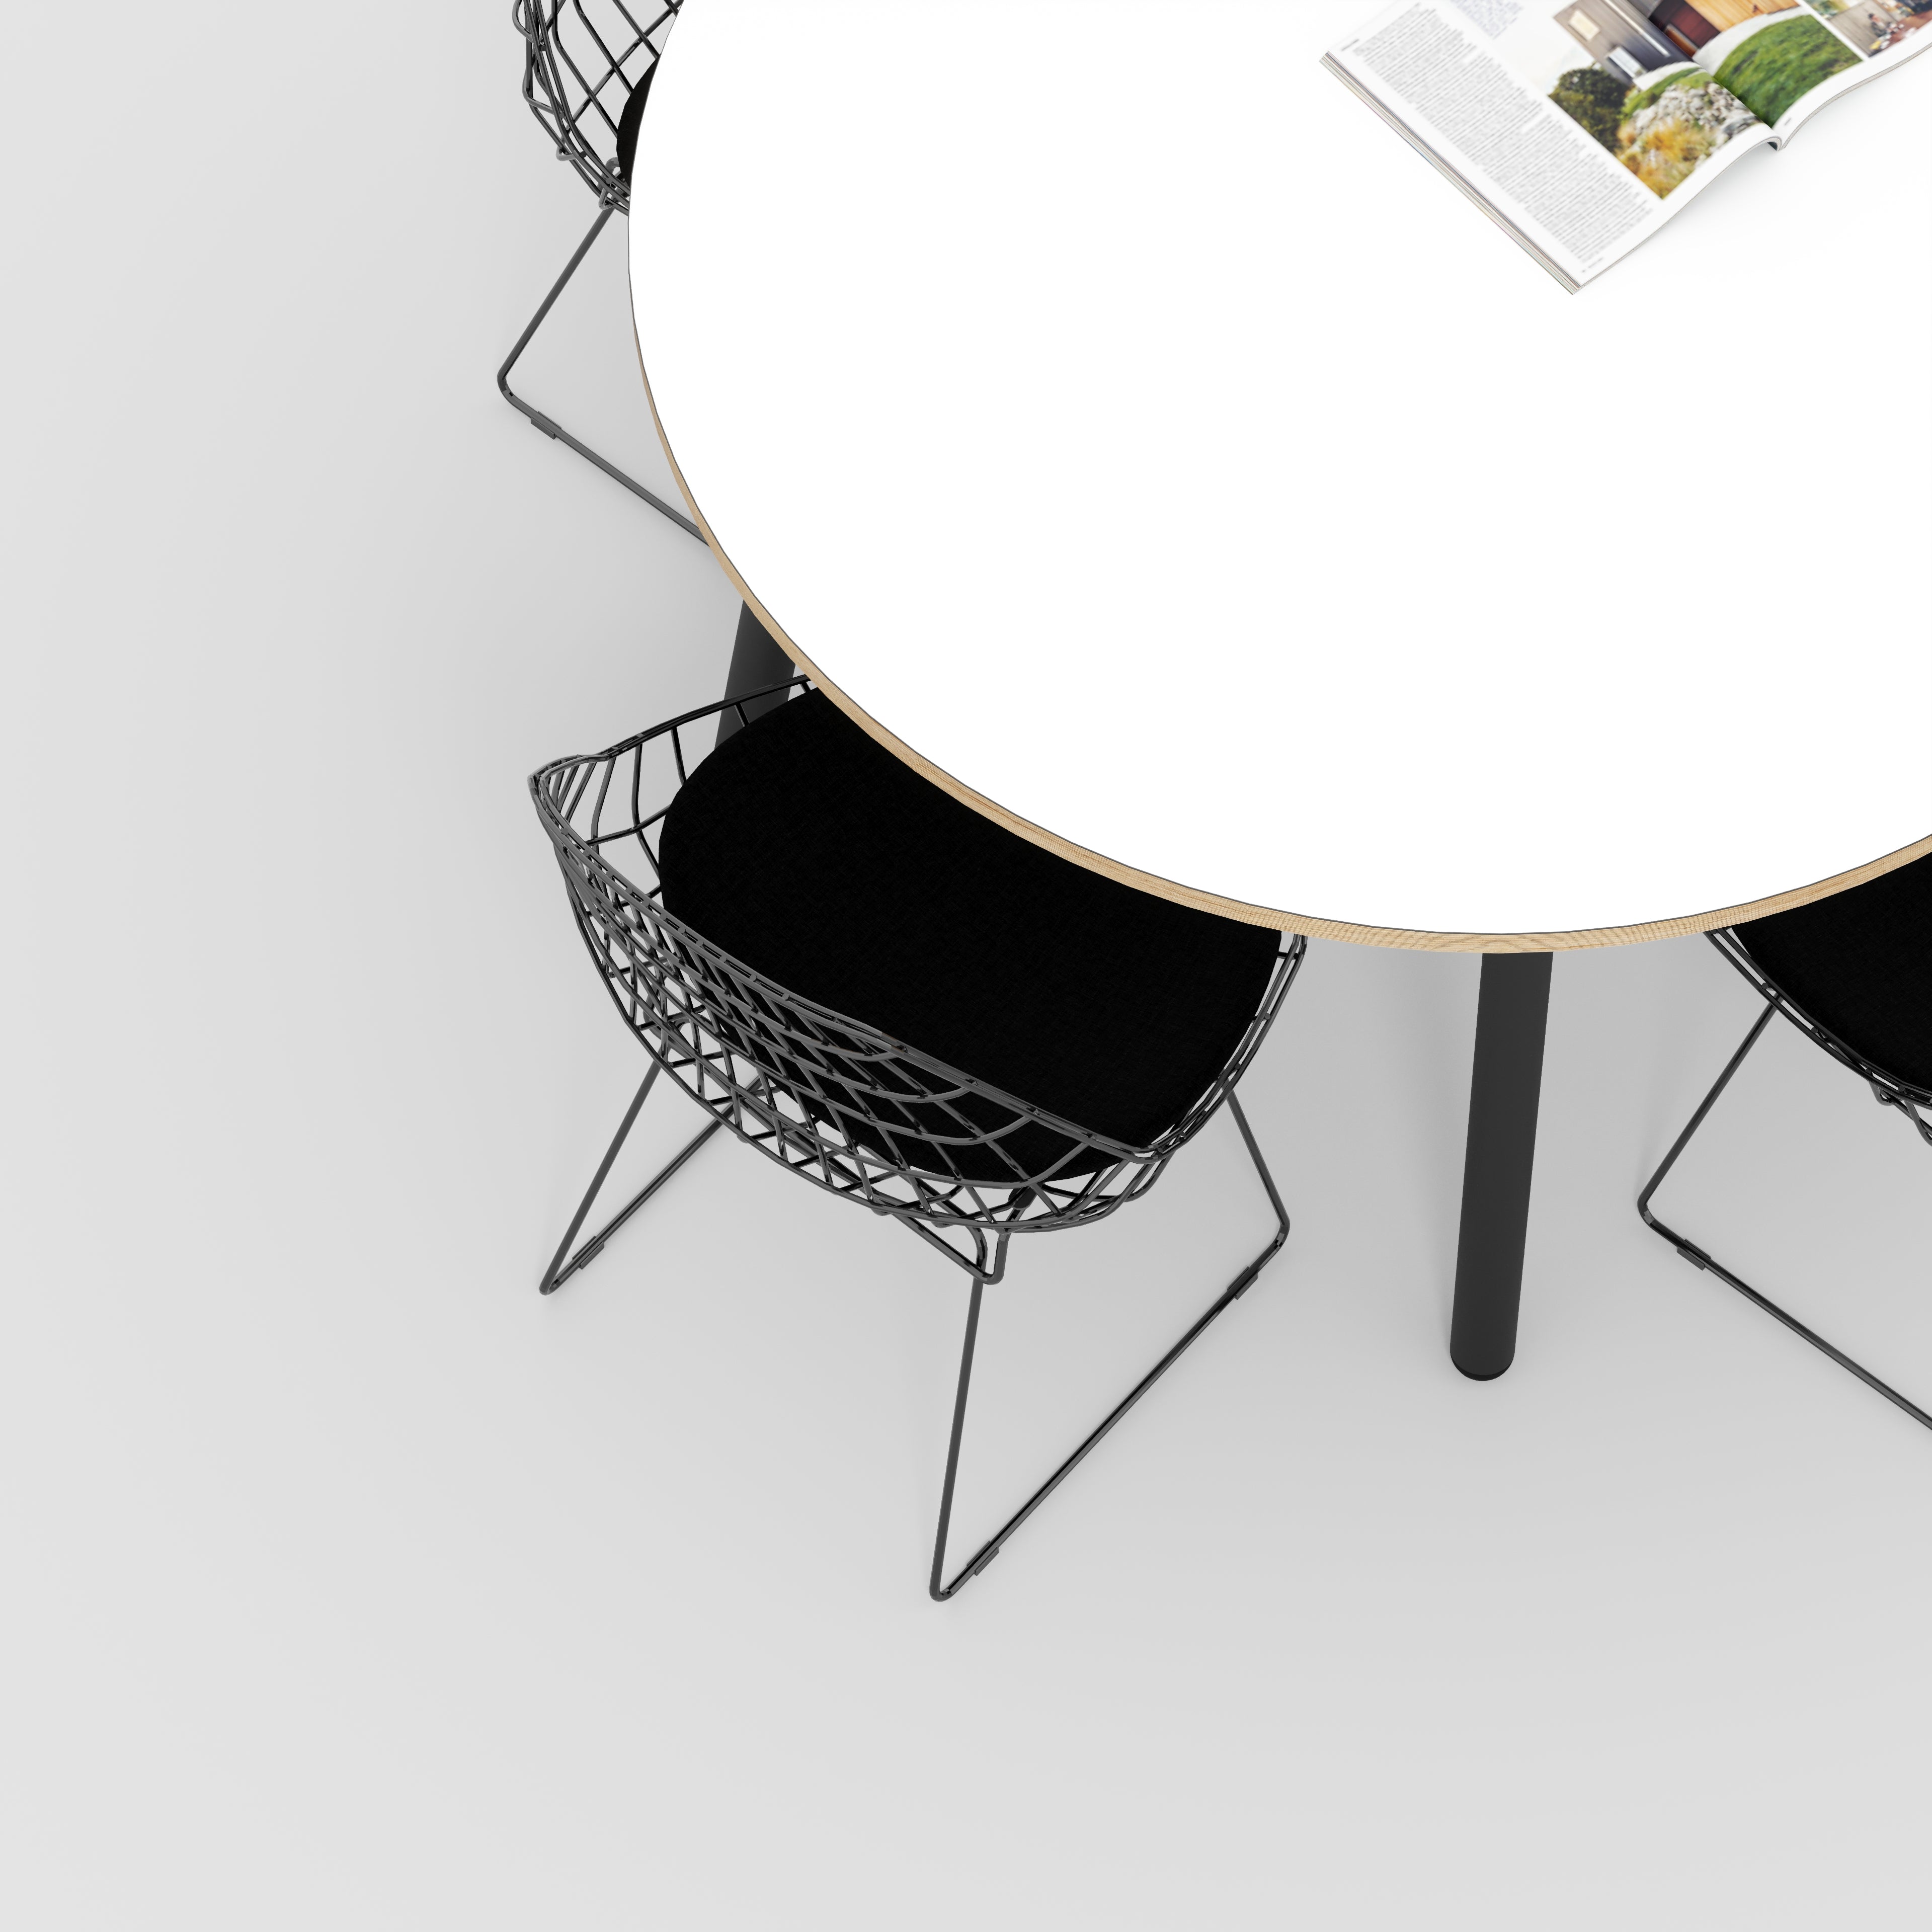 Round Table with Black Round Single Pin Legs - Formica White - 1200(dia) x 735(h)